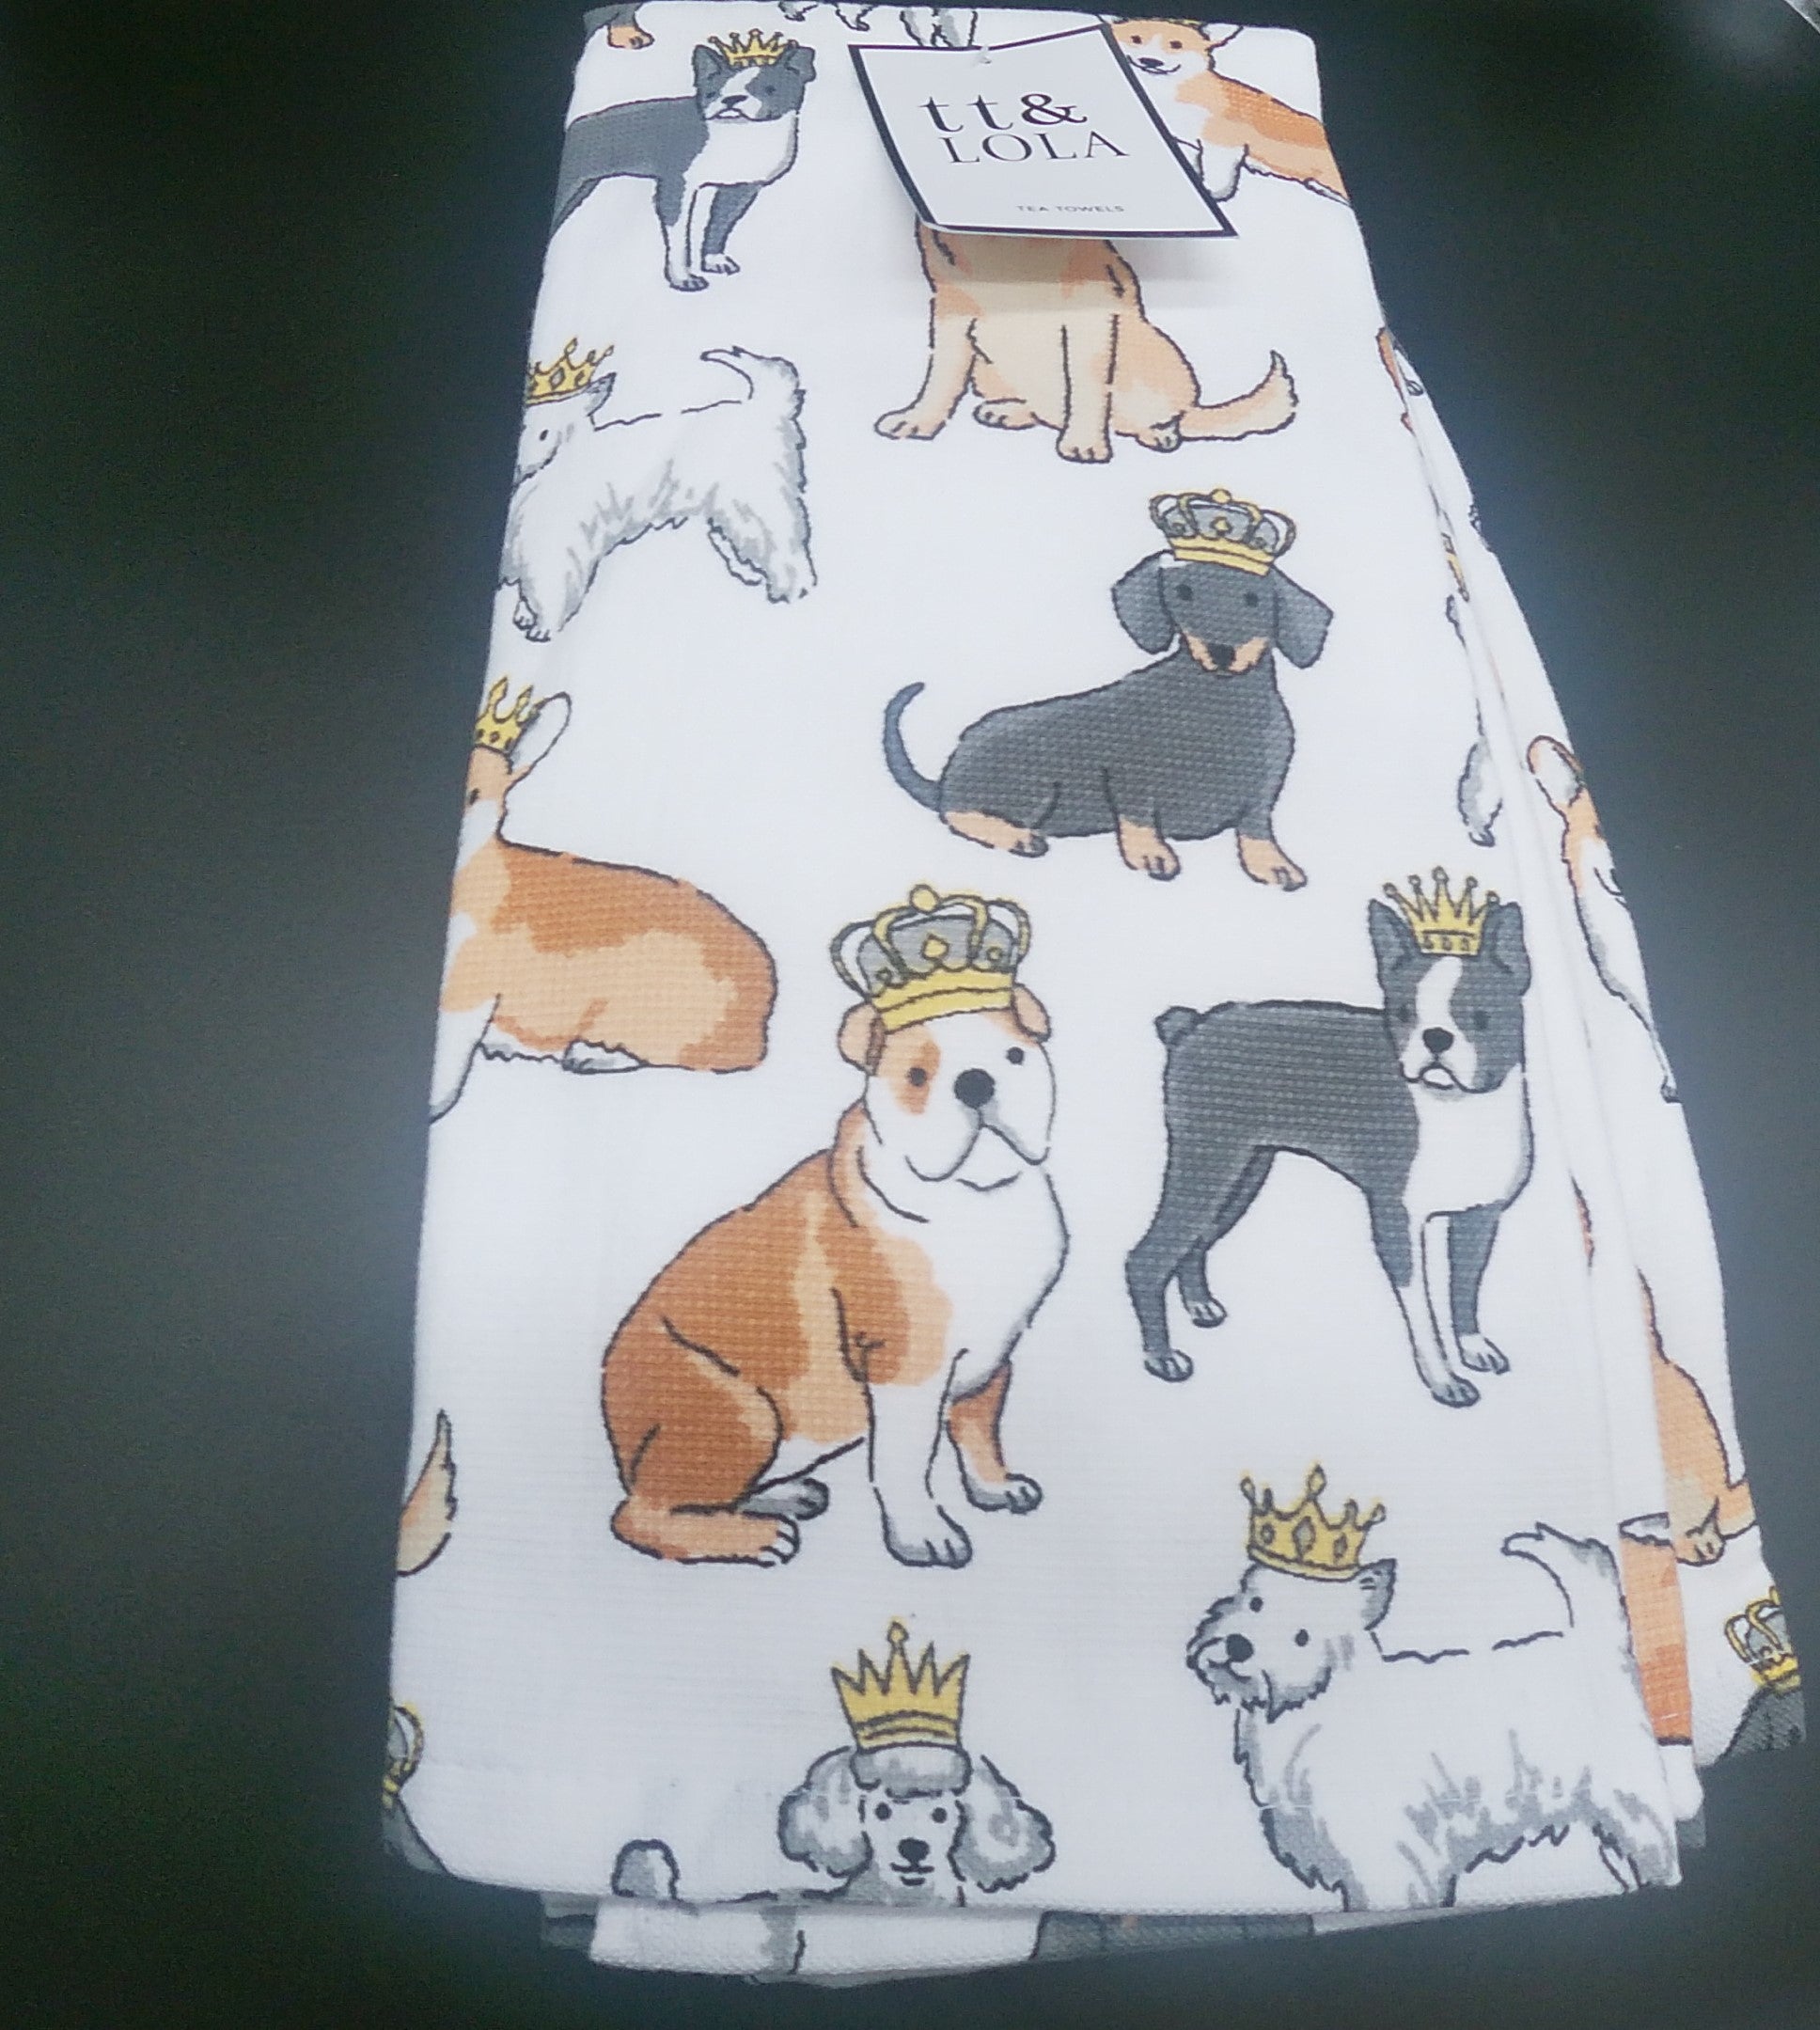 tt & Lola Tea Towels featuring Dogs with Crowns